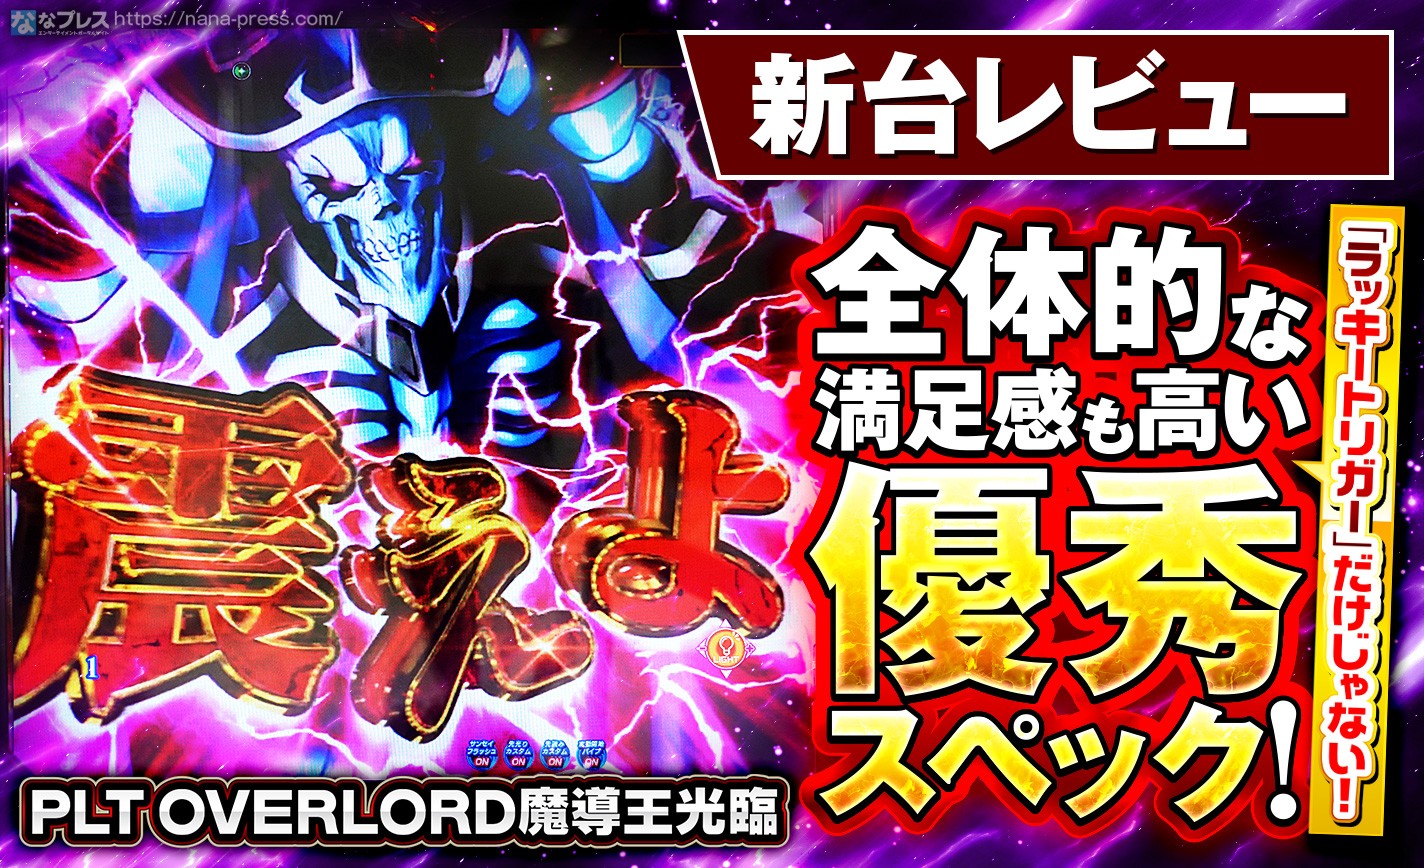 【PLT OVERLORD魔導王光臨】あの時代の興奮が蘇る！？「OVER LORD」のスペックや演出を試打レビュー！ eyecatch-image